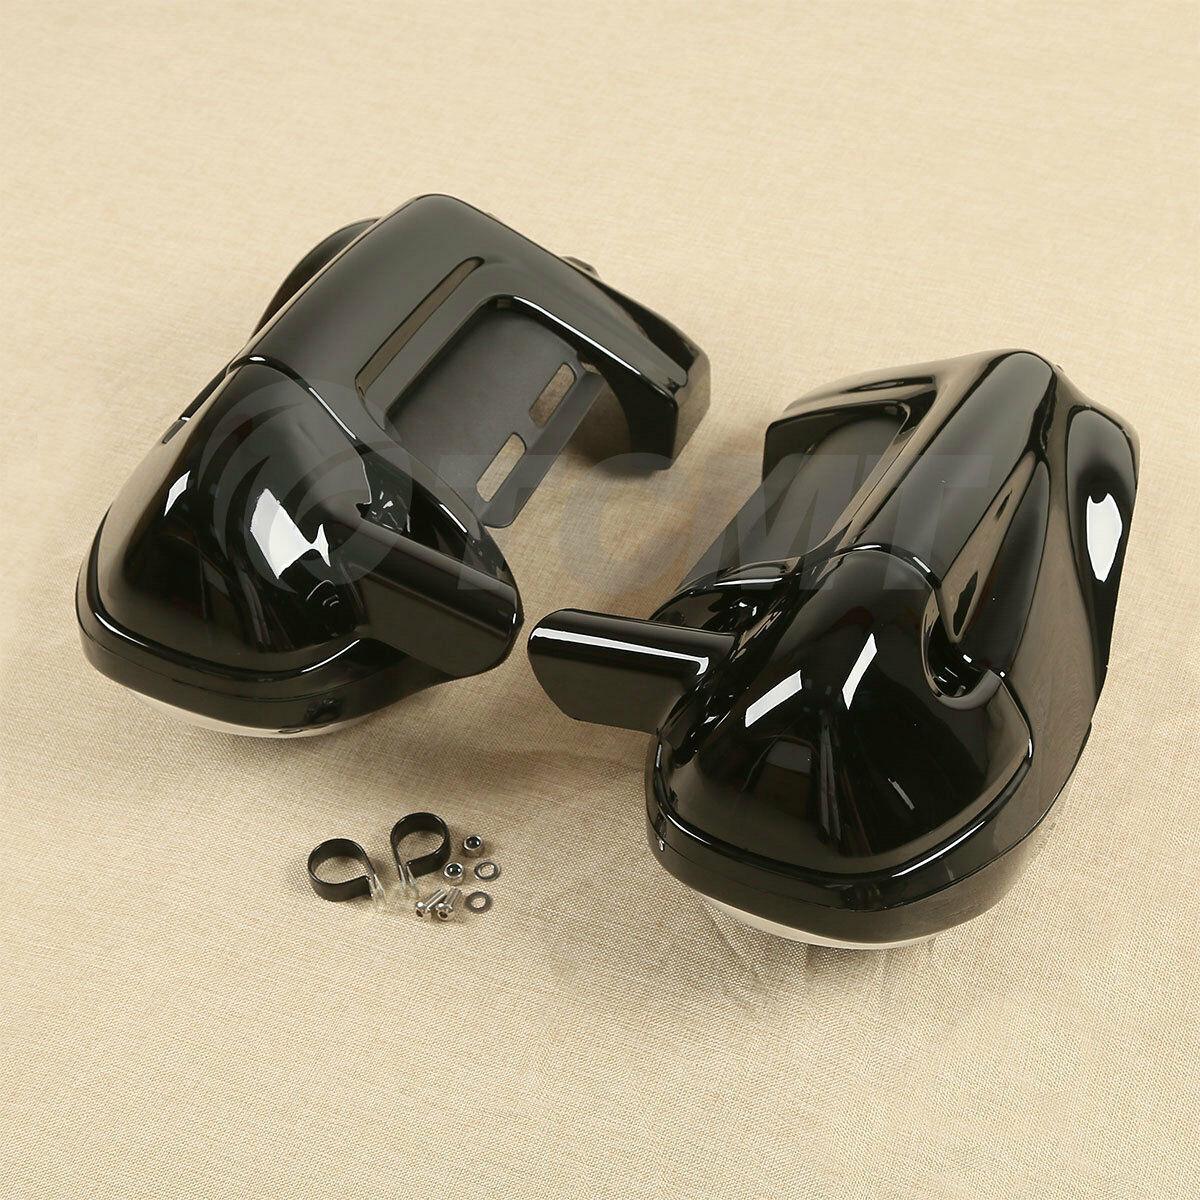 6.5" Speaker Box Pods Lower Vented Leg Fairings Fit For Harley Touring 1983-2013 - Moto Life Products